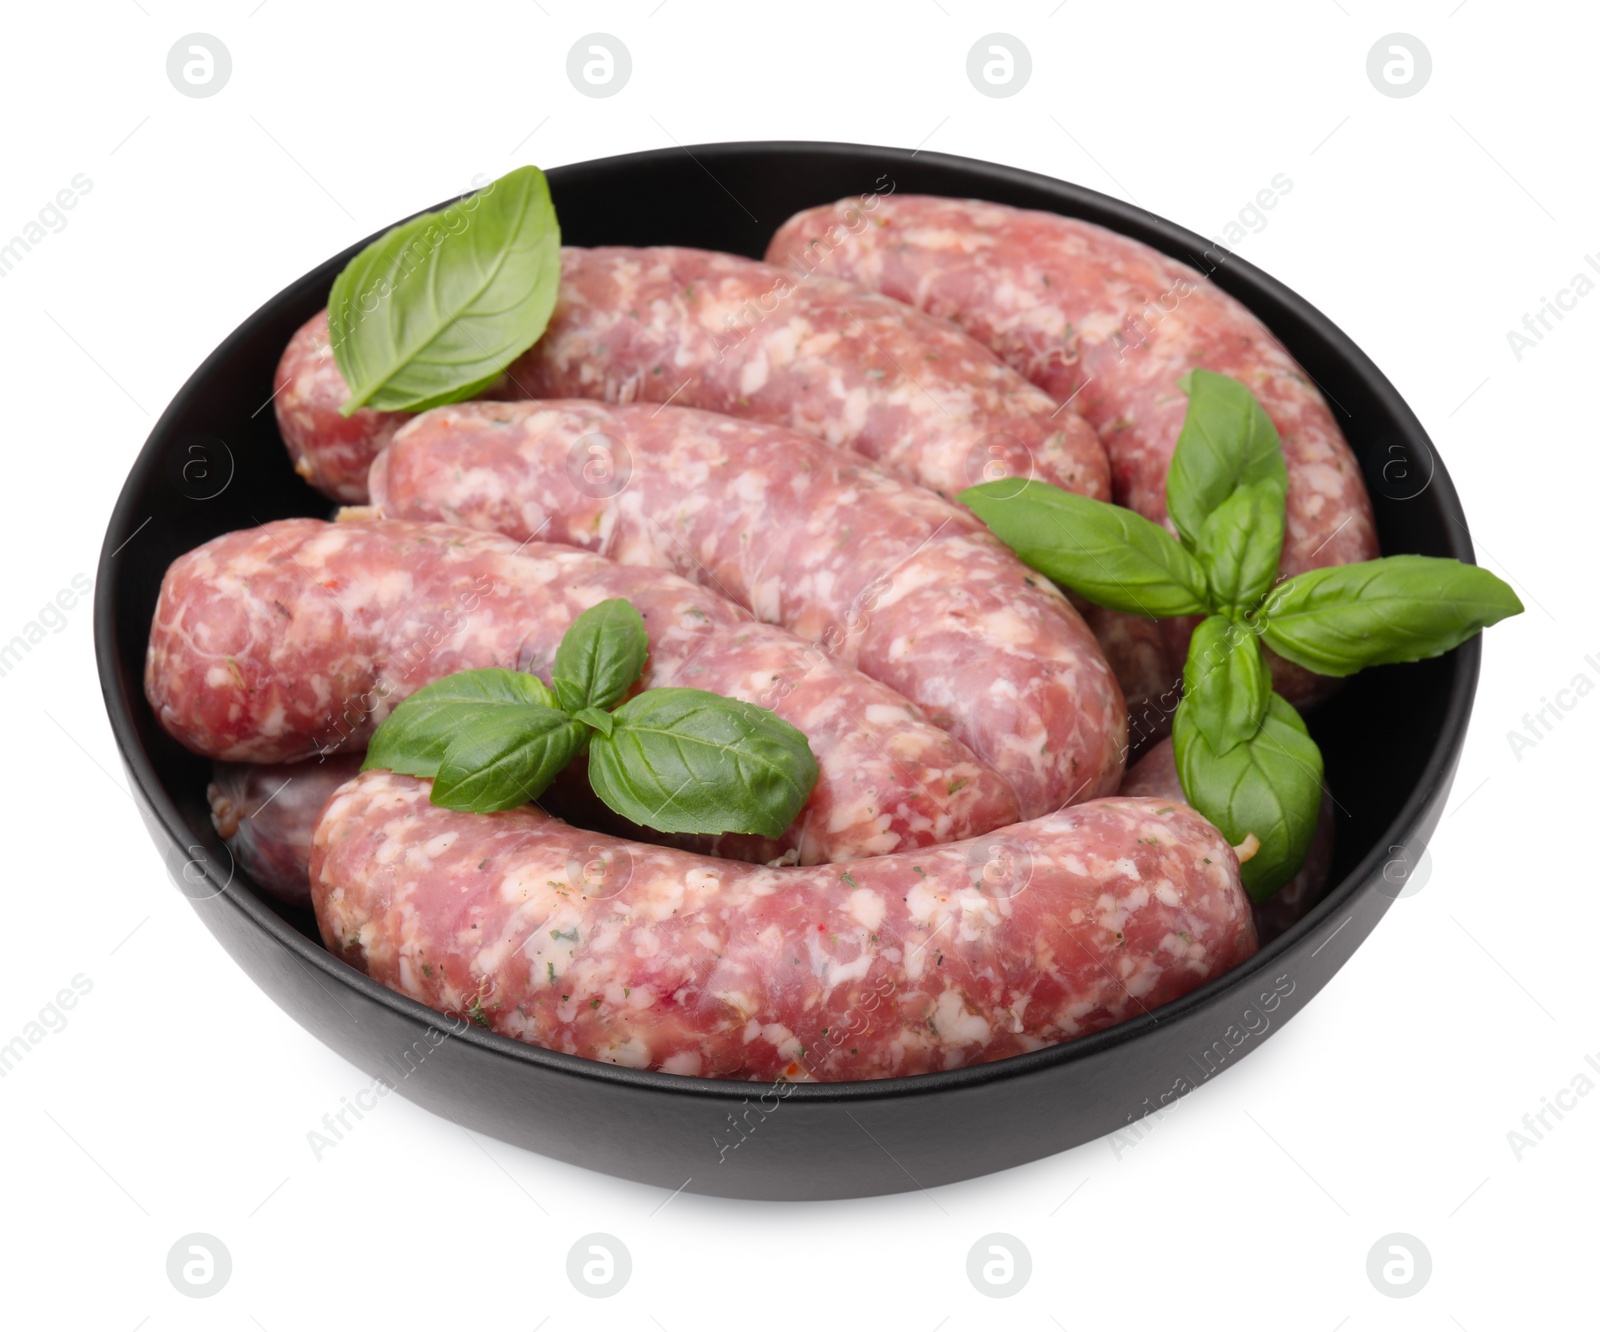 Photo of Raw homemade sausages and basil leaves in bowl isolated on white